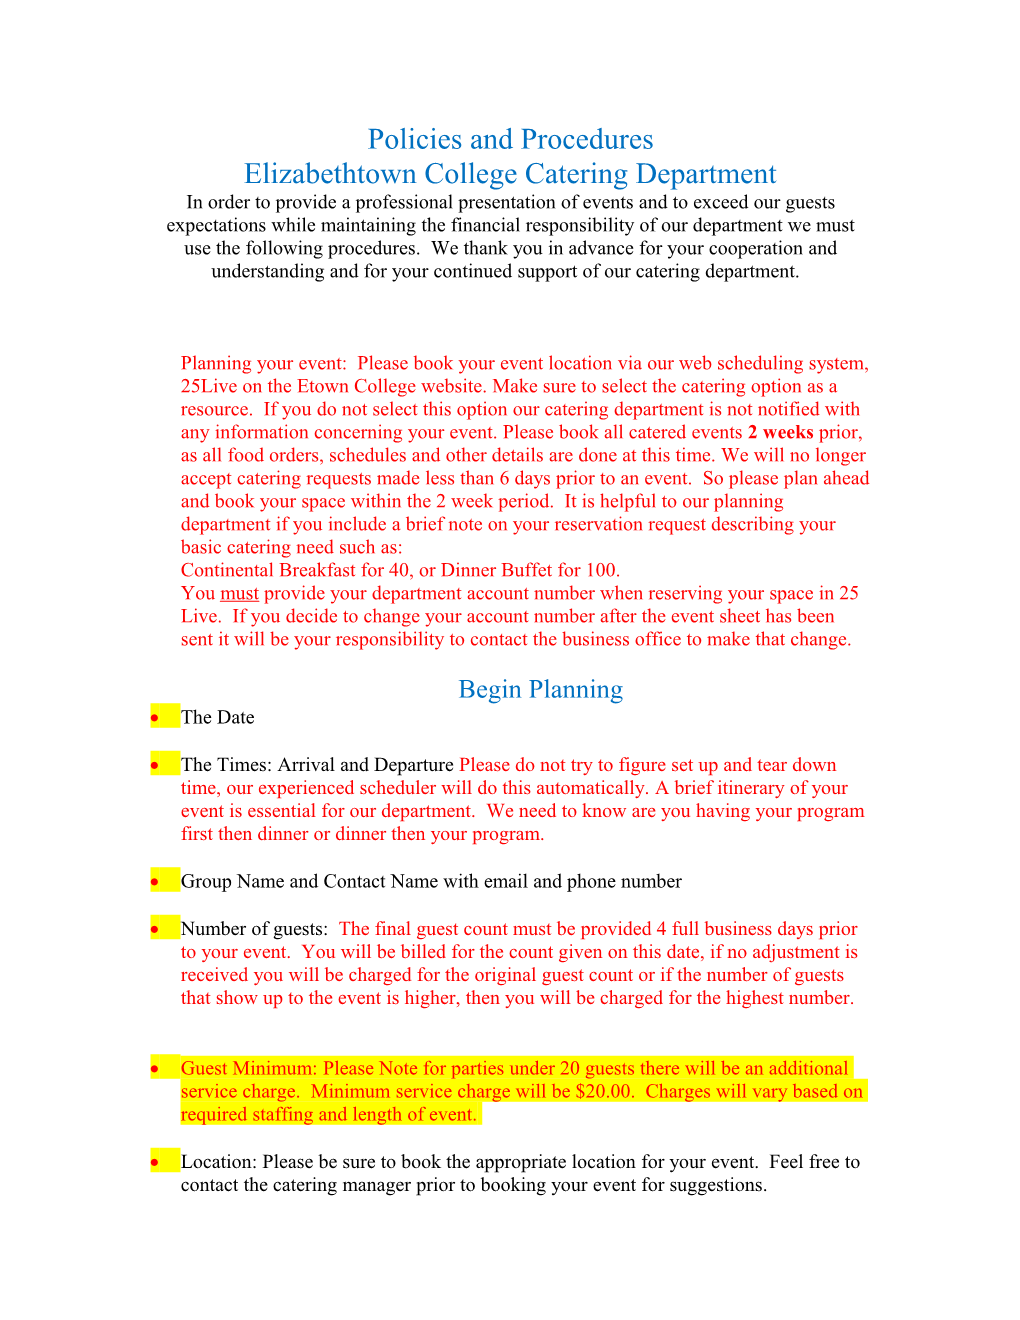 Policies and Procedures for Catering Department